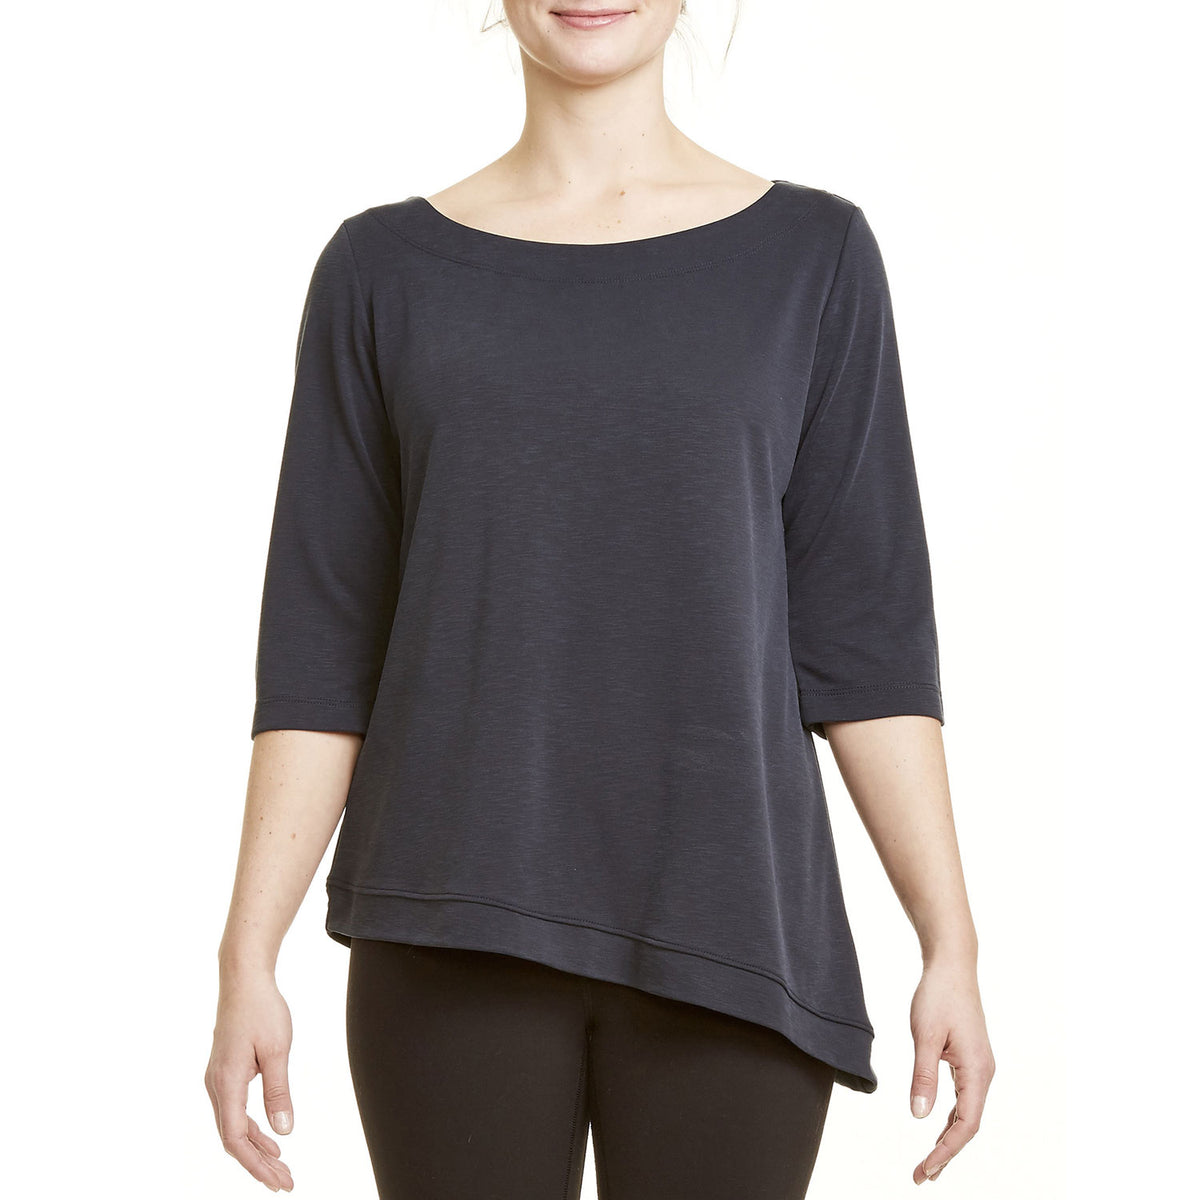 FIG Clothing Women's LAD Top | Altitude Sports